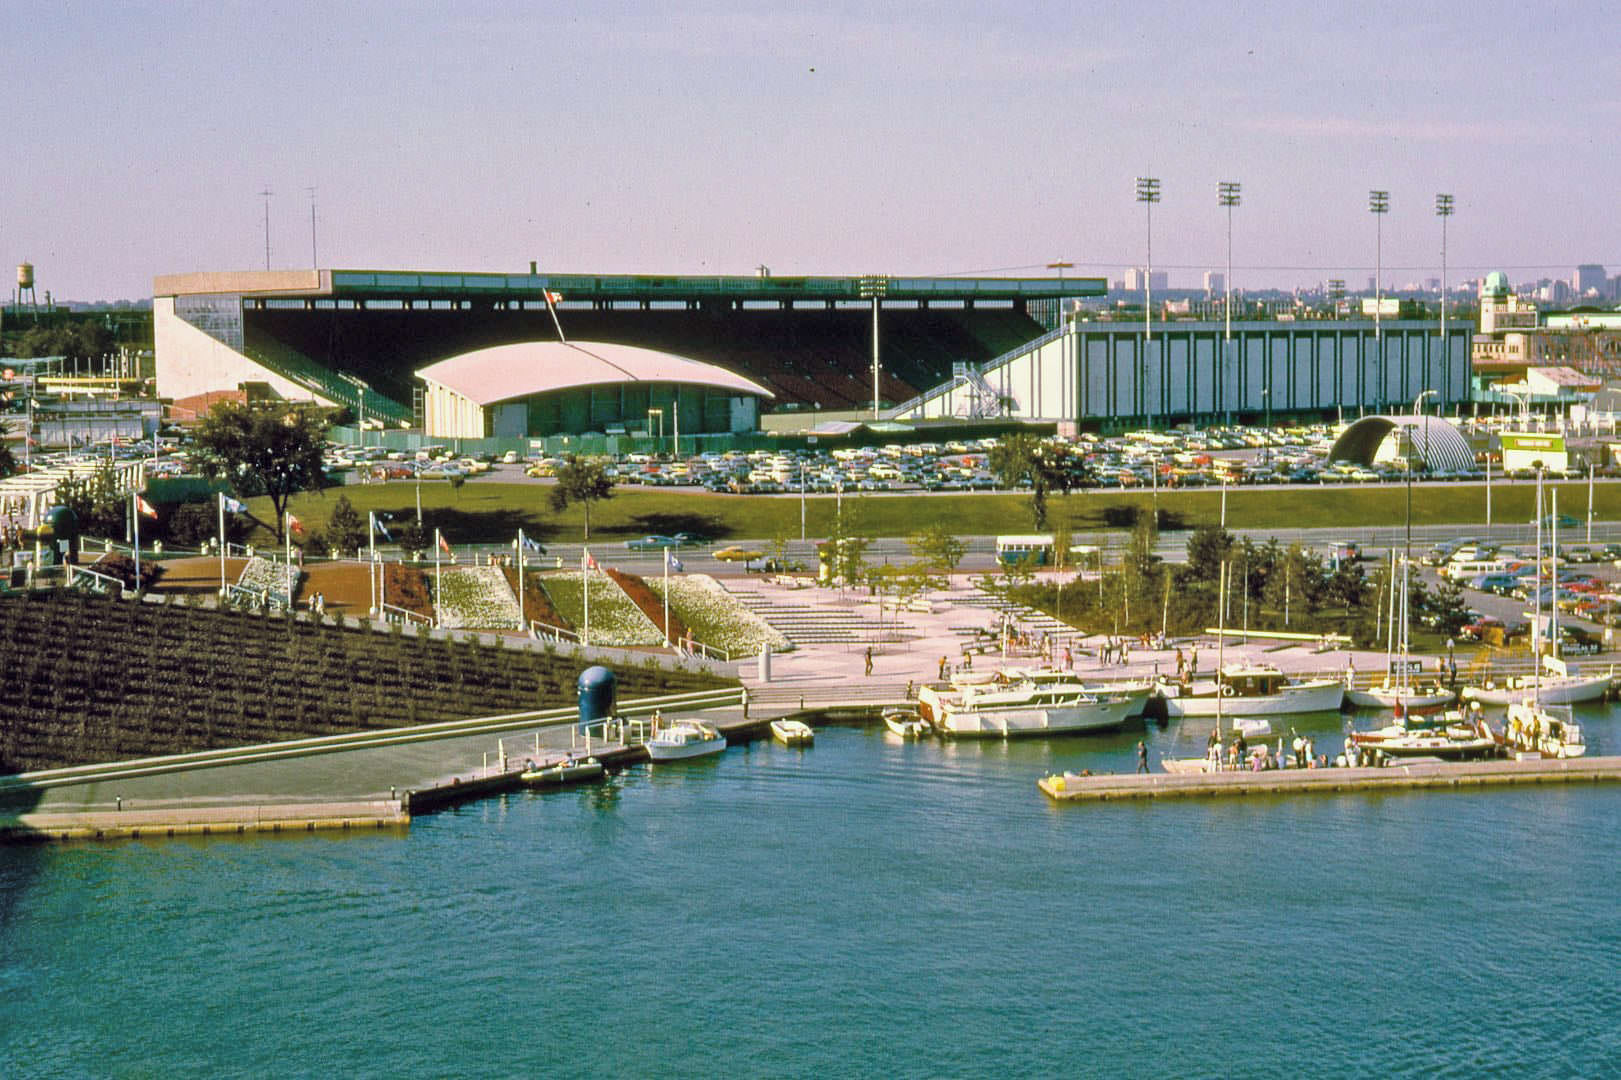 Exhibition Stadium, C.N.E. grounds, as viewed from Ontario Place, captured by my father in September 1972. - Credit: Dan Ward